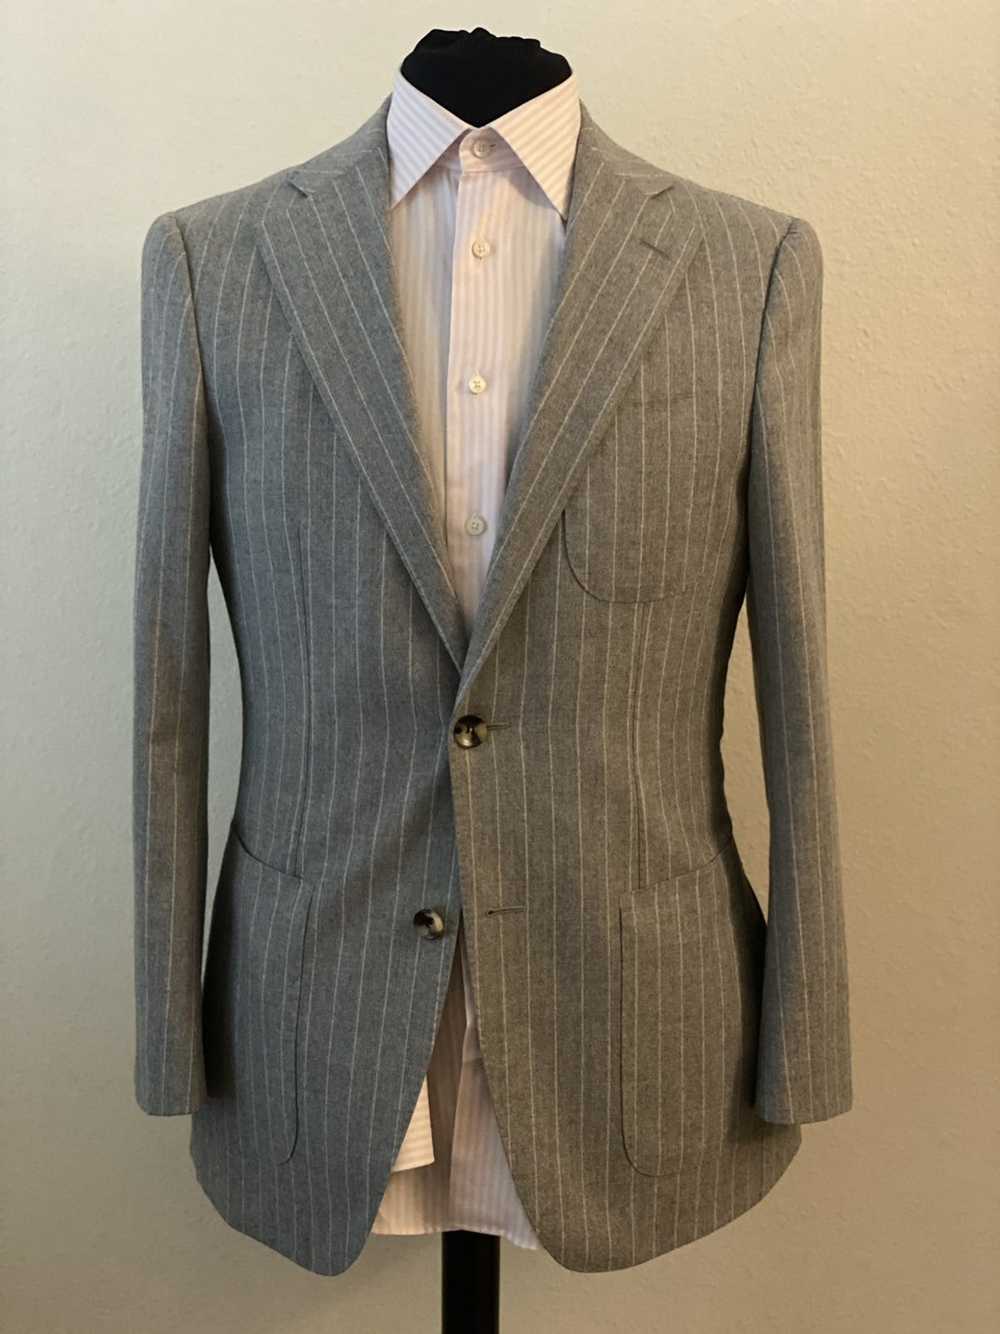 Suitsupply Pinstriped Grey Suit - image 1